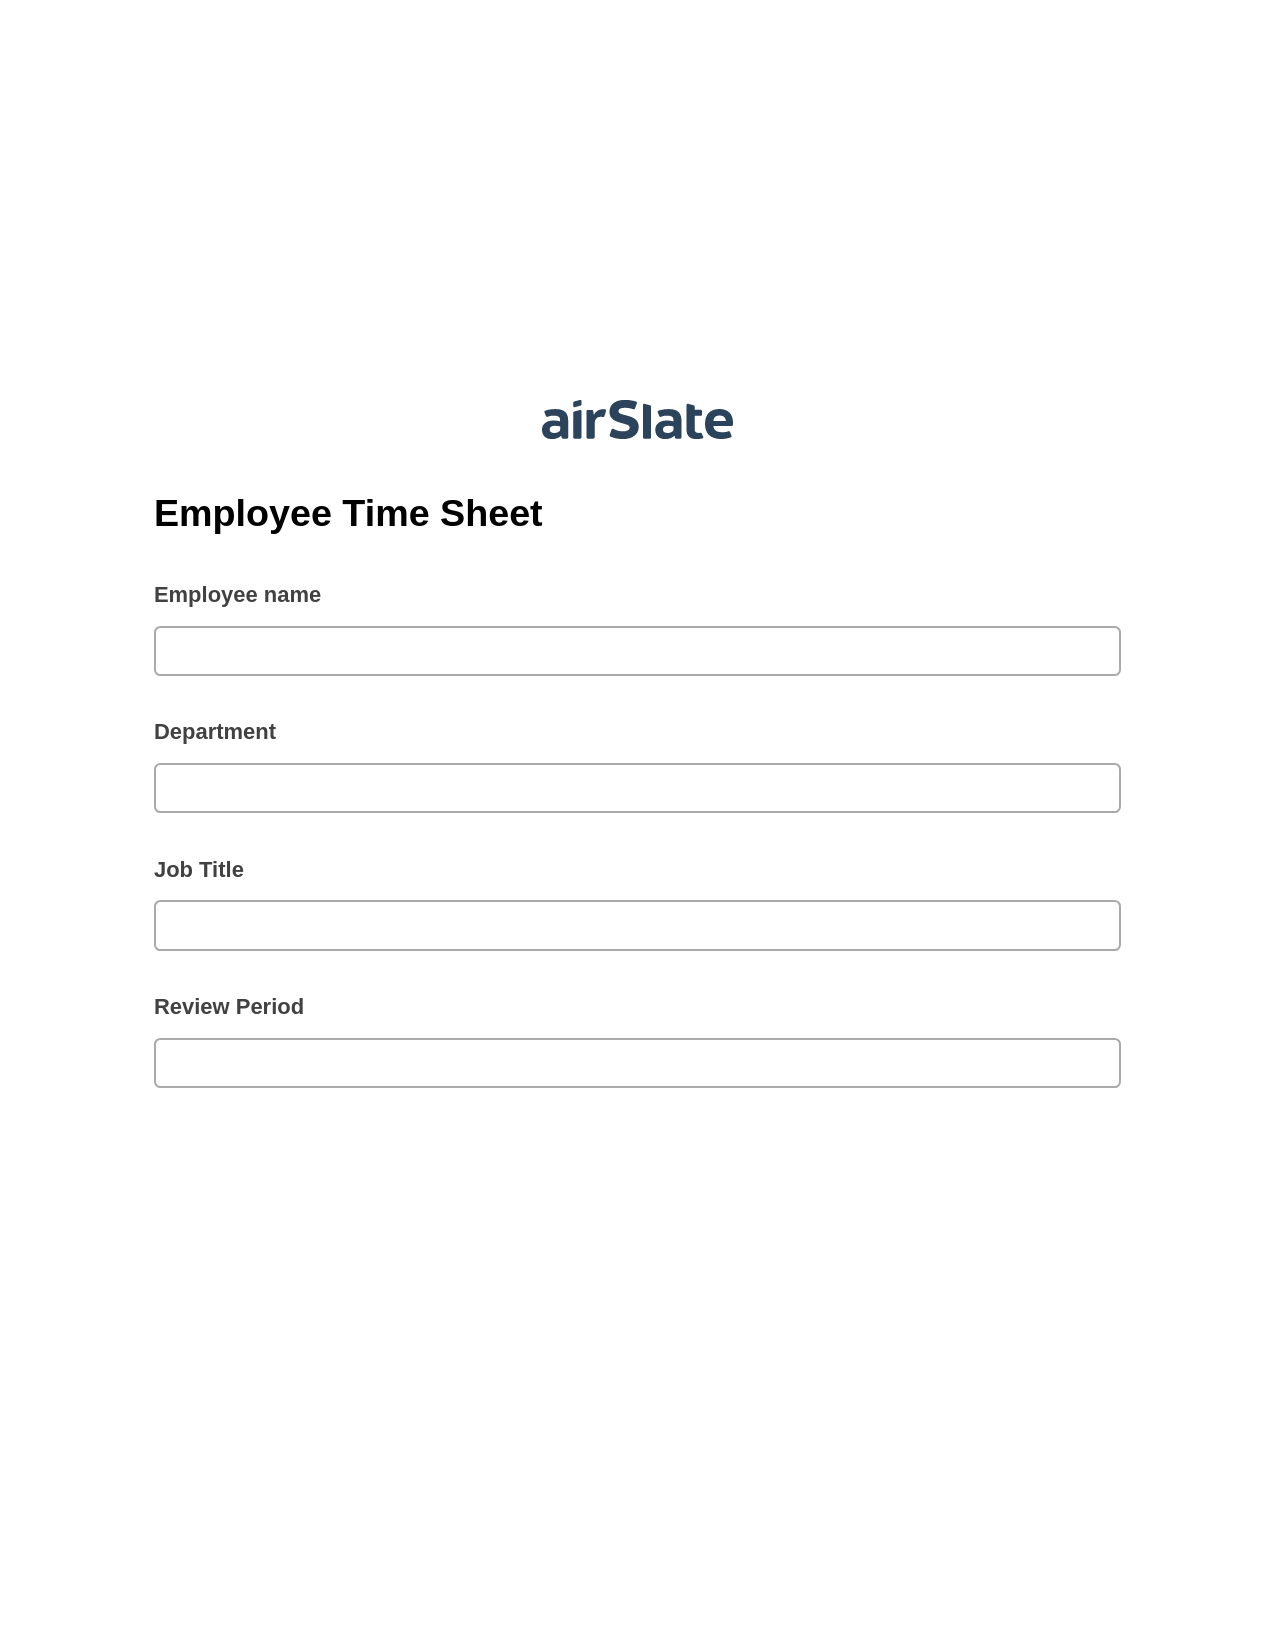 Multirole Employee Time Sheet Pre-fill from MS Dynamics 365 Records, Create Salesforce Records Bot, Slack Notification Postfinish Bot